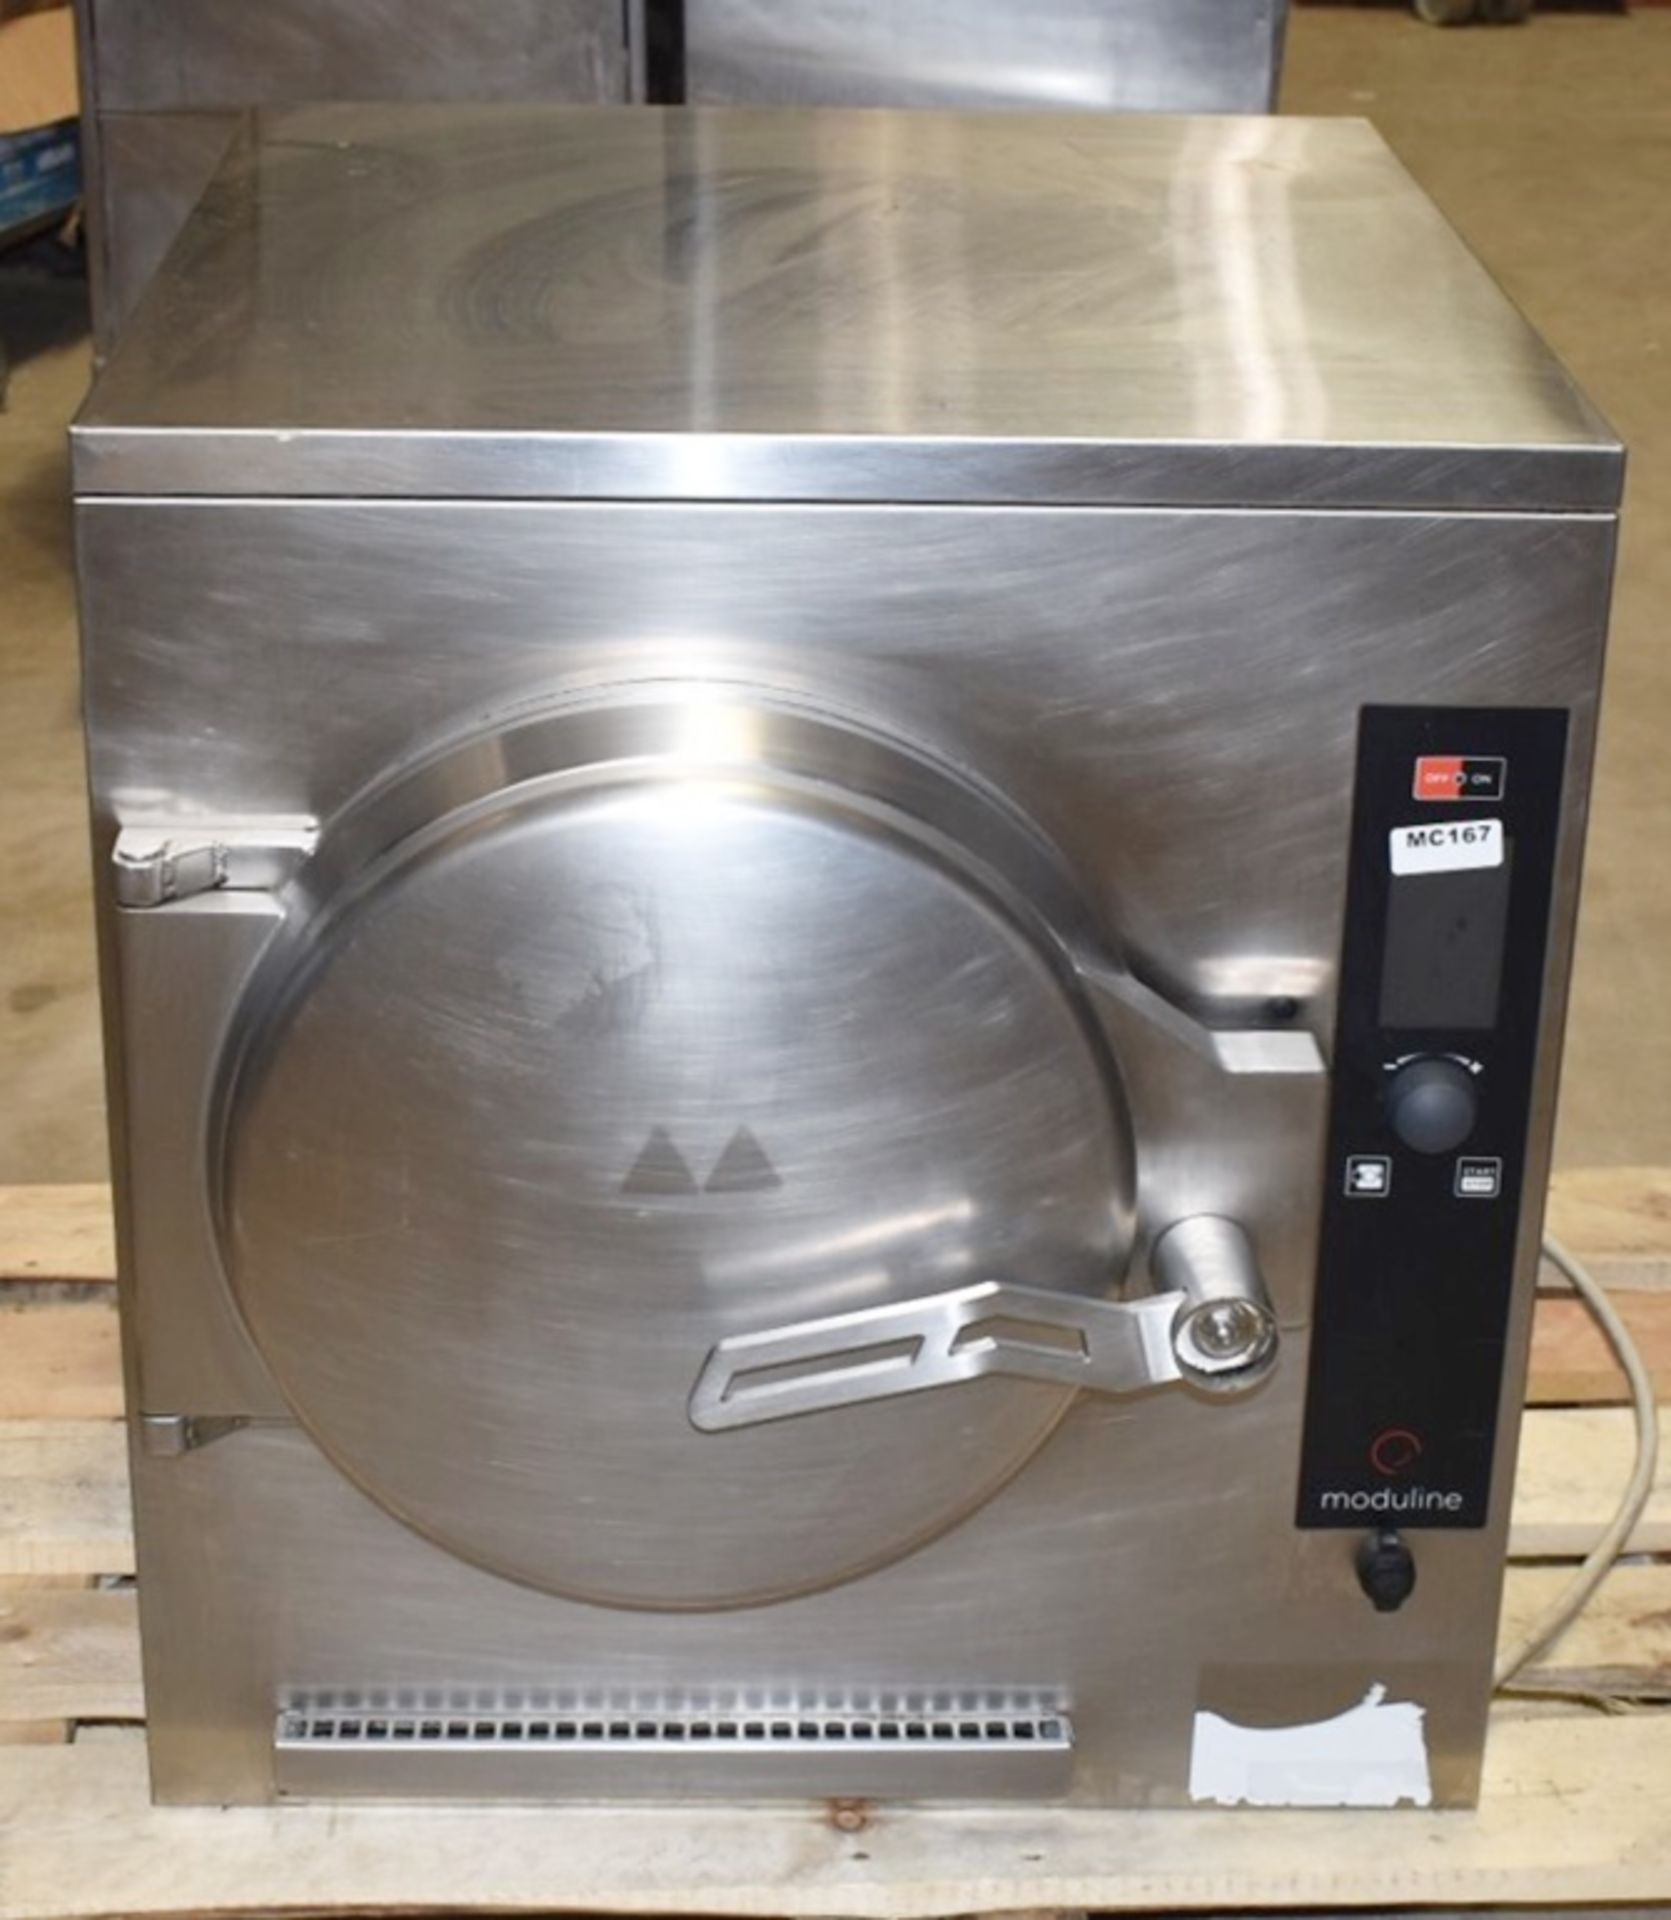 1 x Moduline Cook and Hold Pressure Cooker - Year 2016 - Model CVE031E - 3 Phase - Image 2 of 11